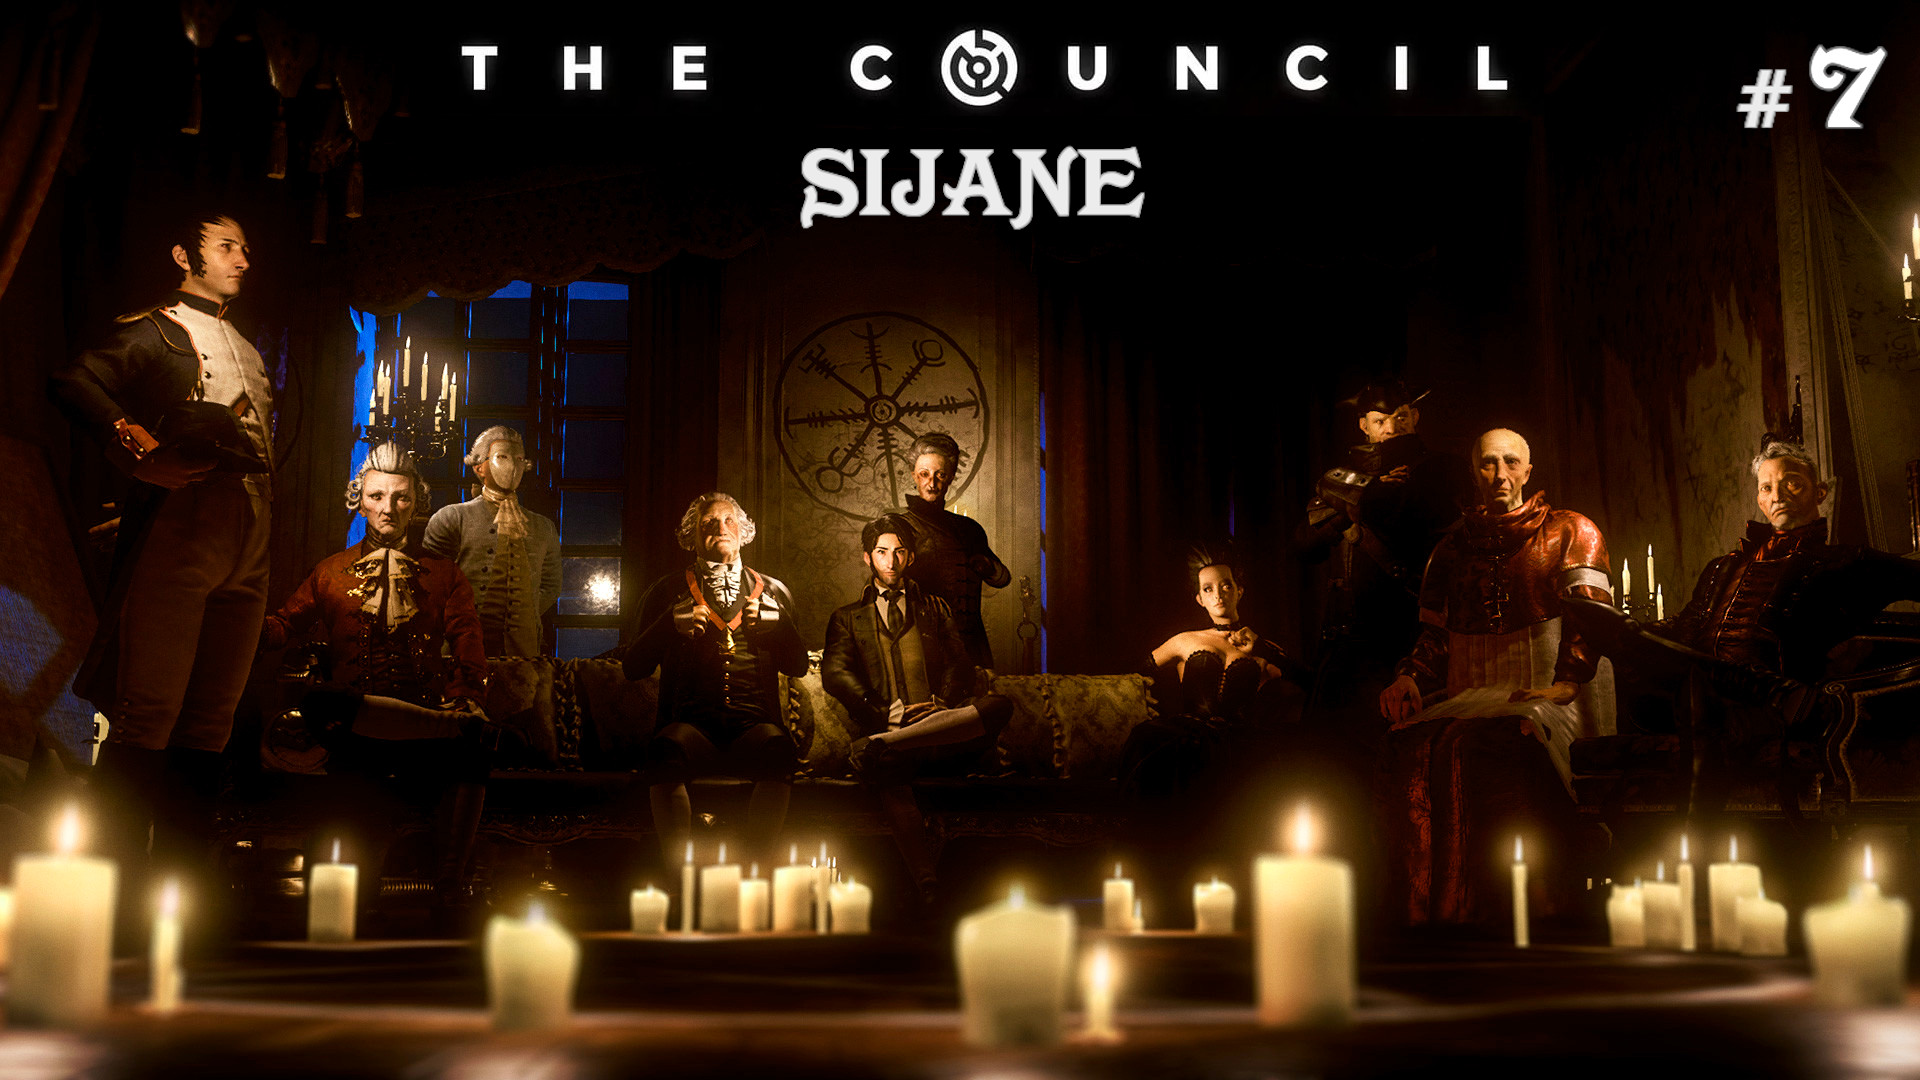 The Council Episode 3 - Ripples #7